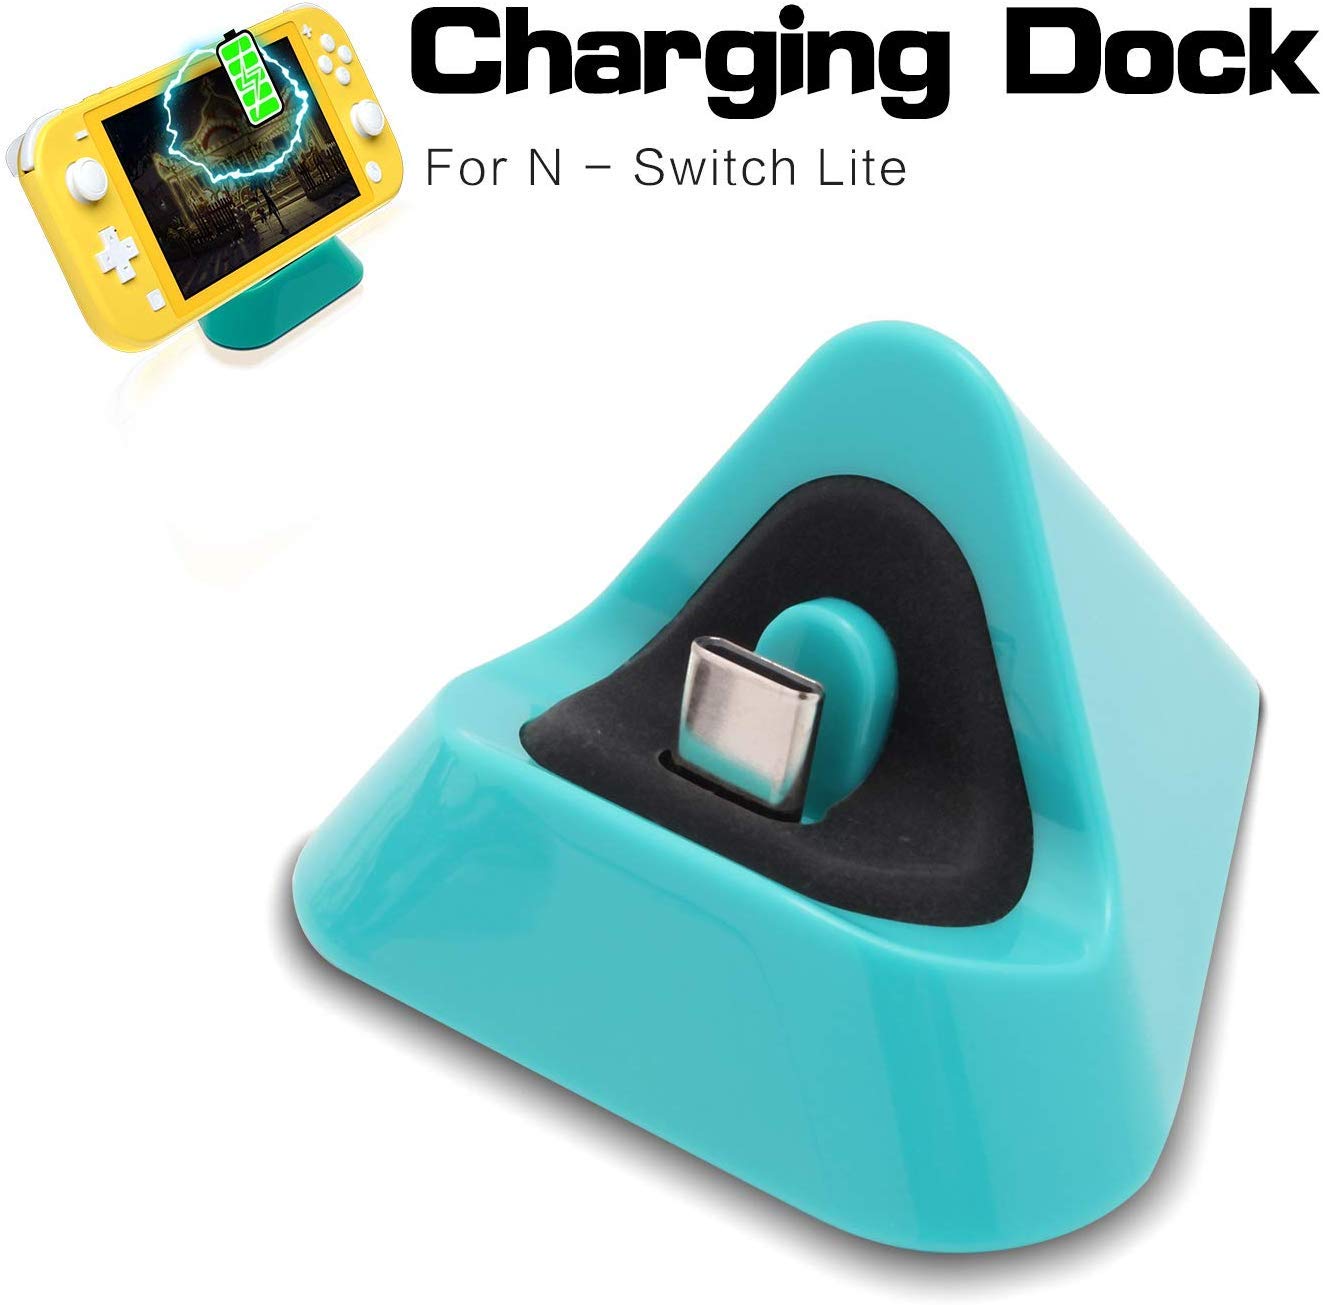 DOBE Mini Replacement Charging Dock Charger Stand Station for Nintendo Switch Lite Game Console USB Type C Port – Turquoise Green